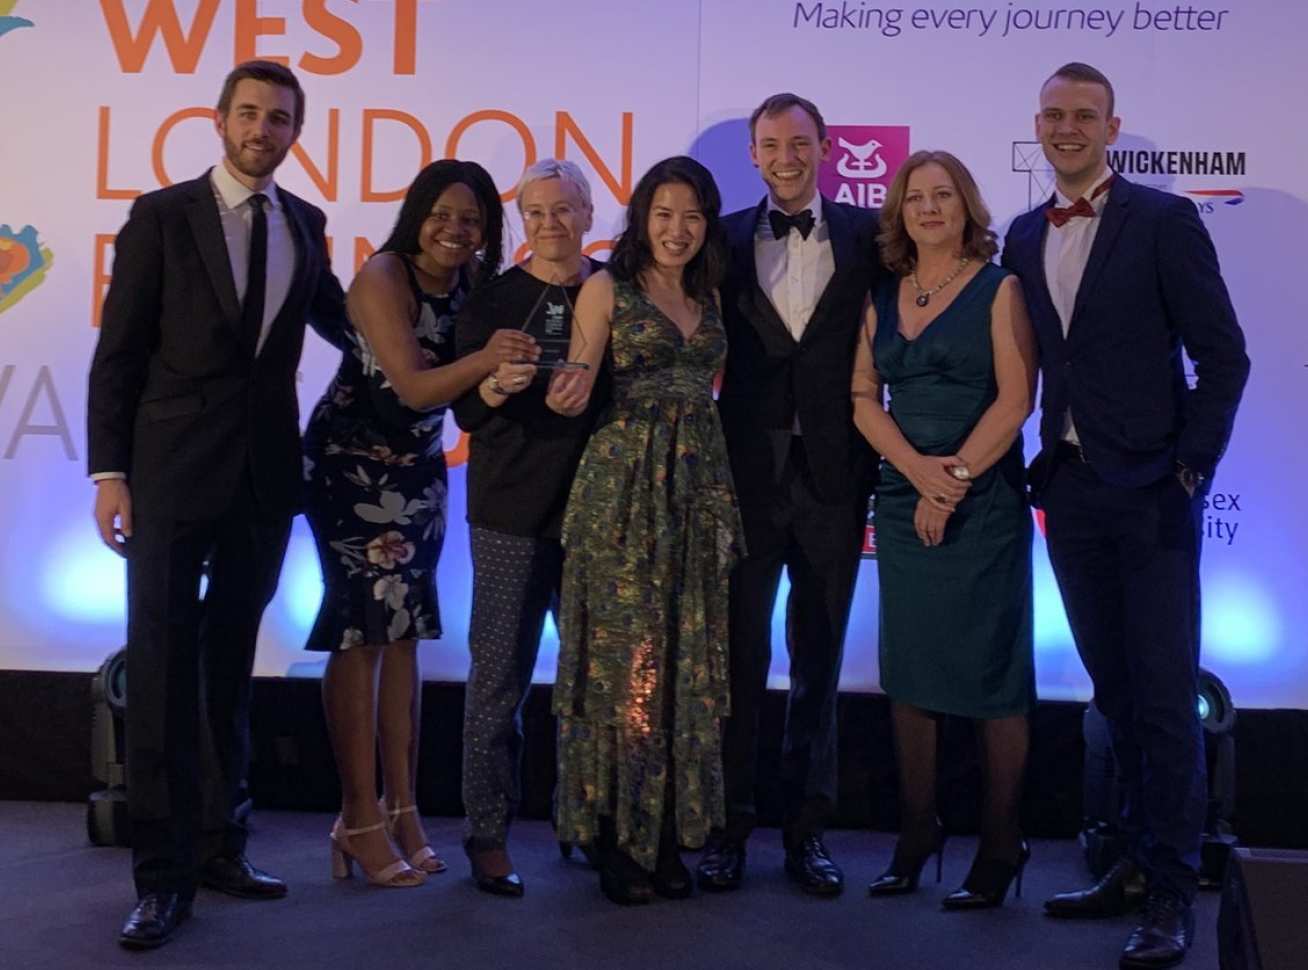 The Customem team collecting their West London Business Award